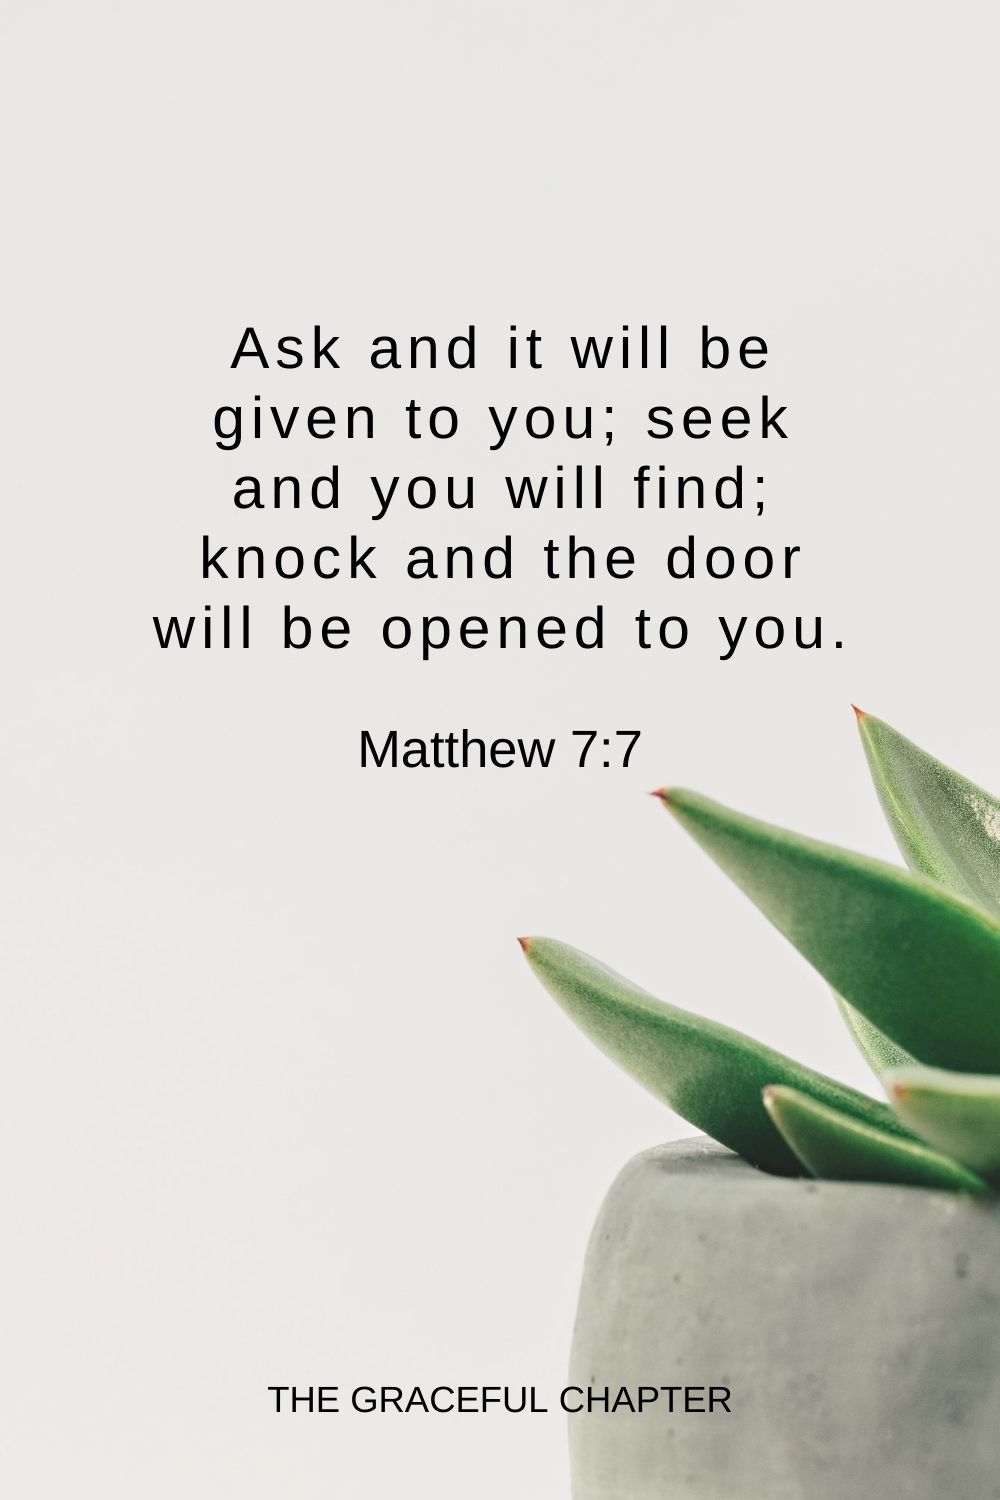 Ask and it will be given to you; seek and you will find; knock and the door will be opened to you. Matthew 7:7